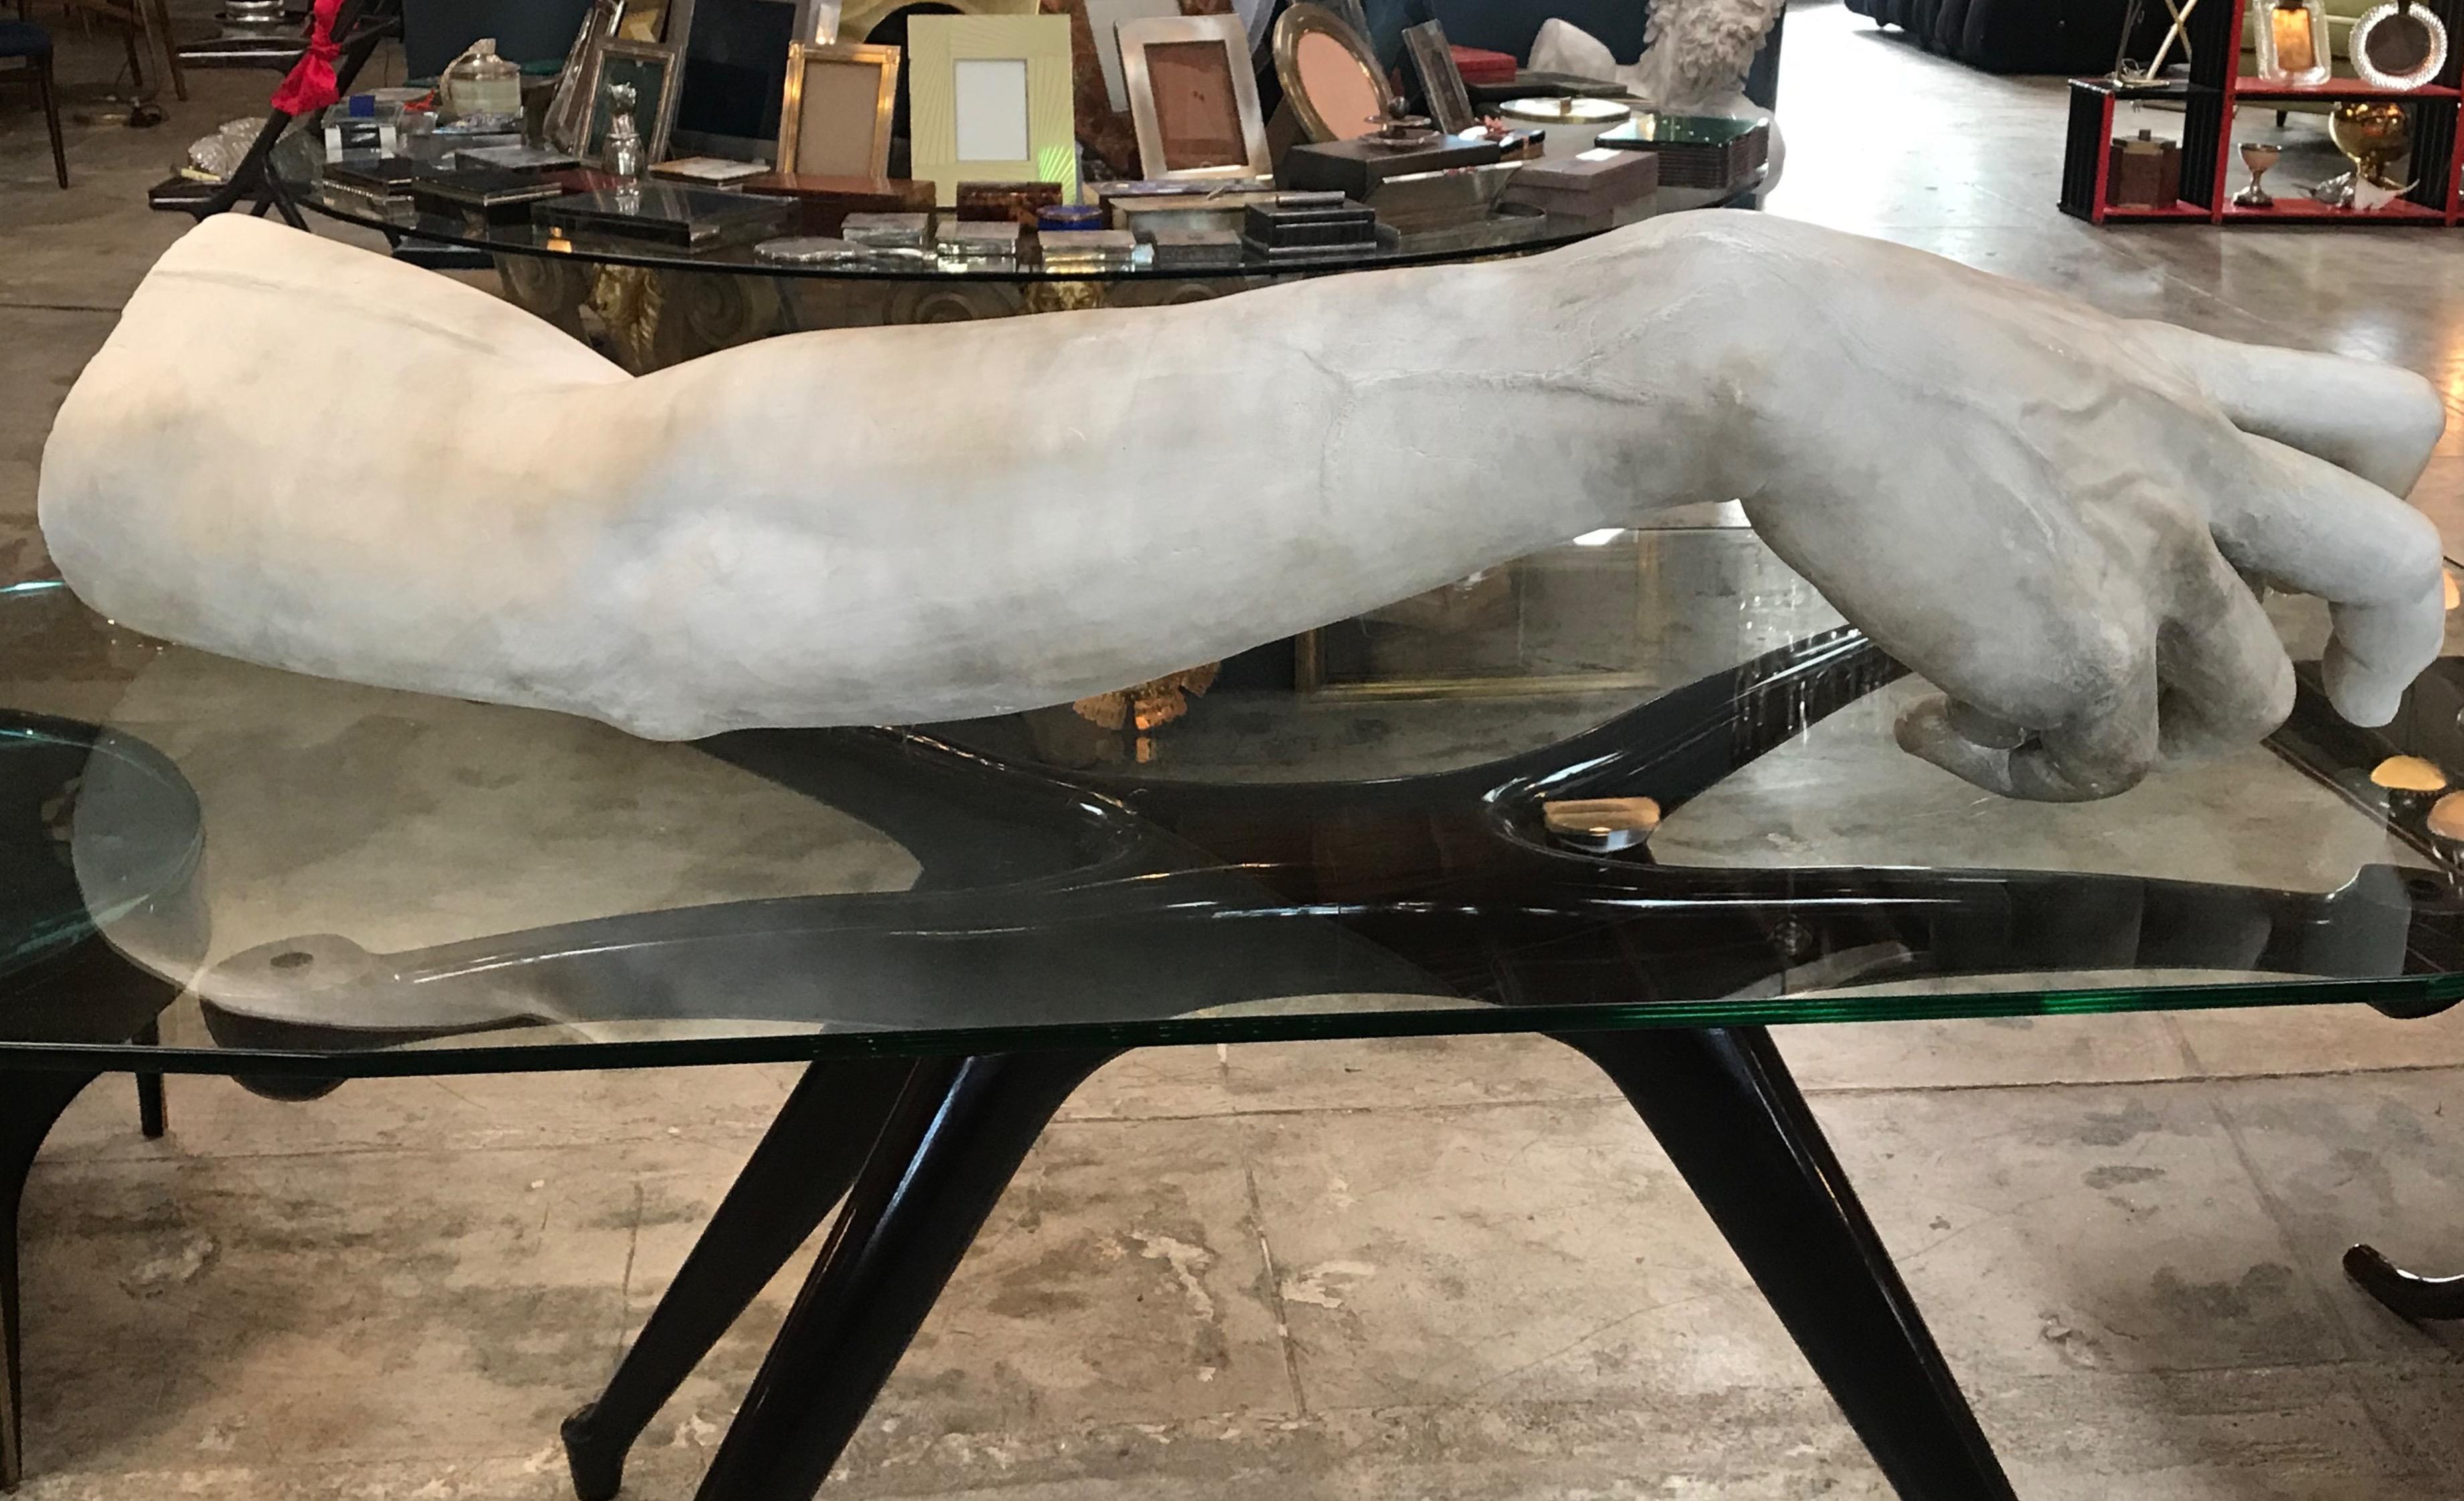 Gesso statue of the arm of Michelangelo's David. Scale 1:1
Crafted from an Art School in Rome, Italy, circa 1970s.